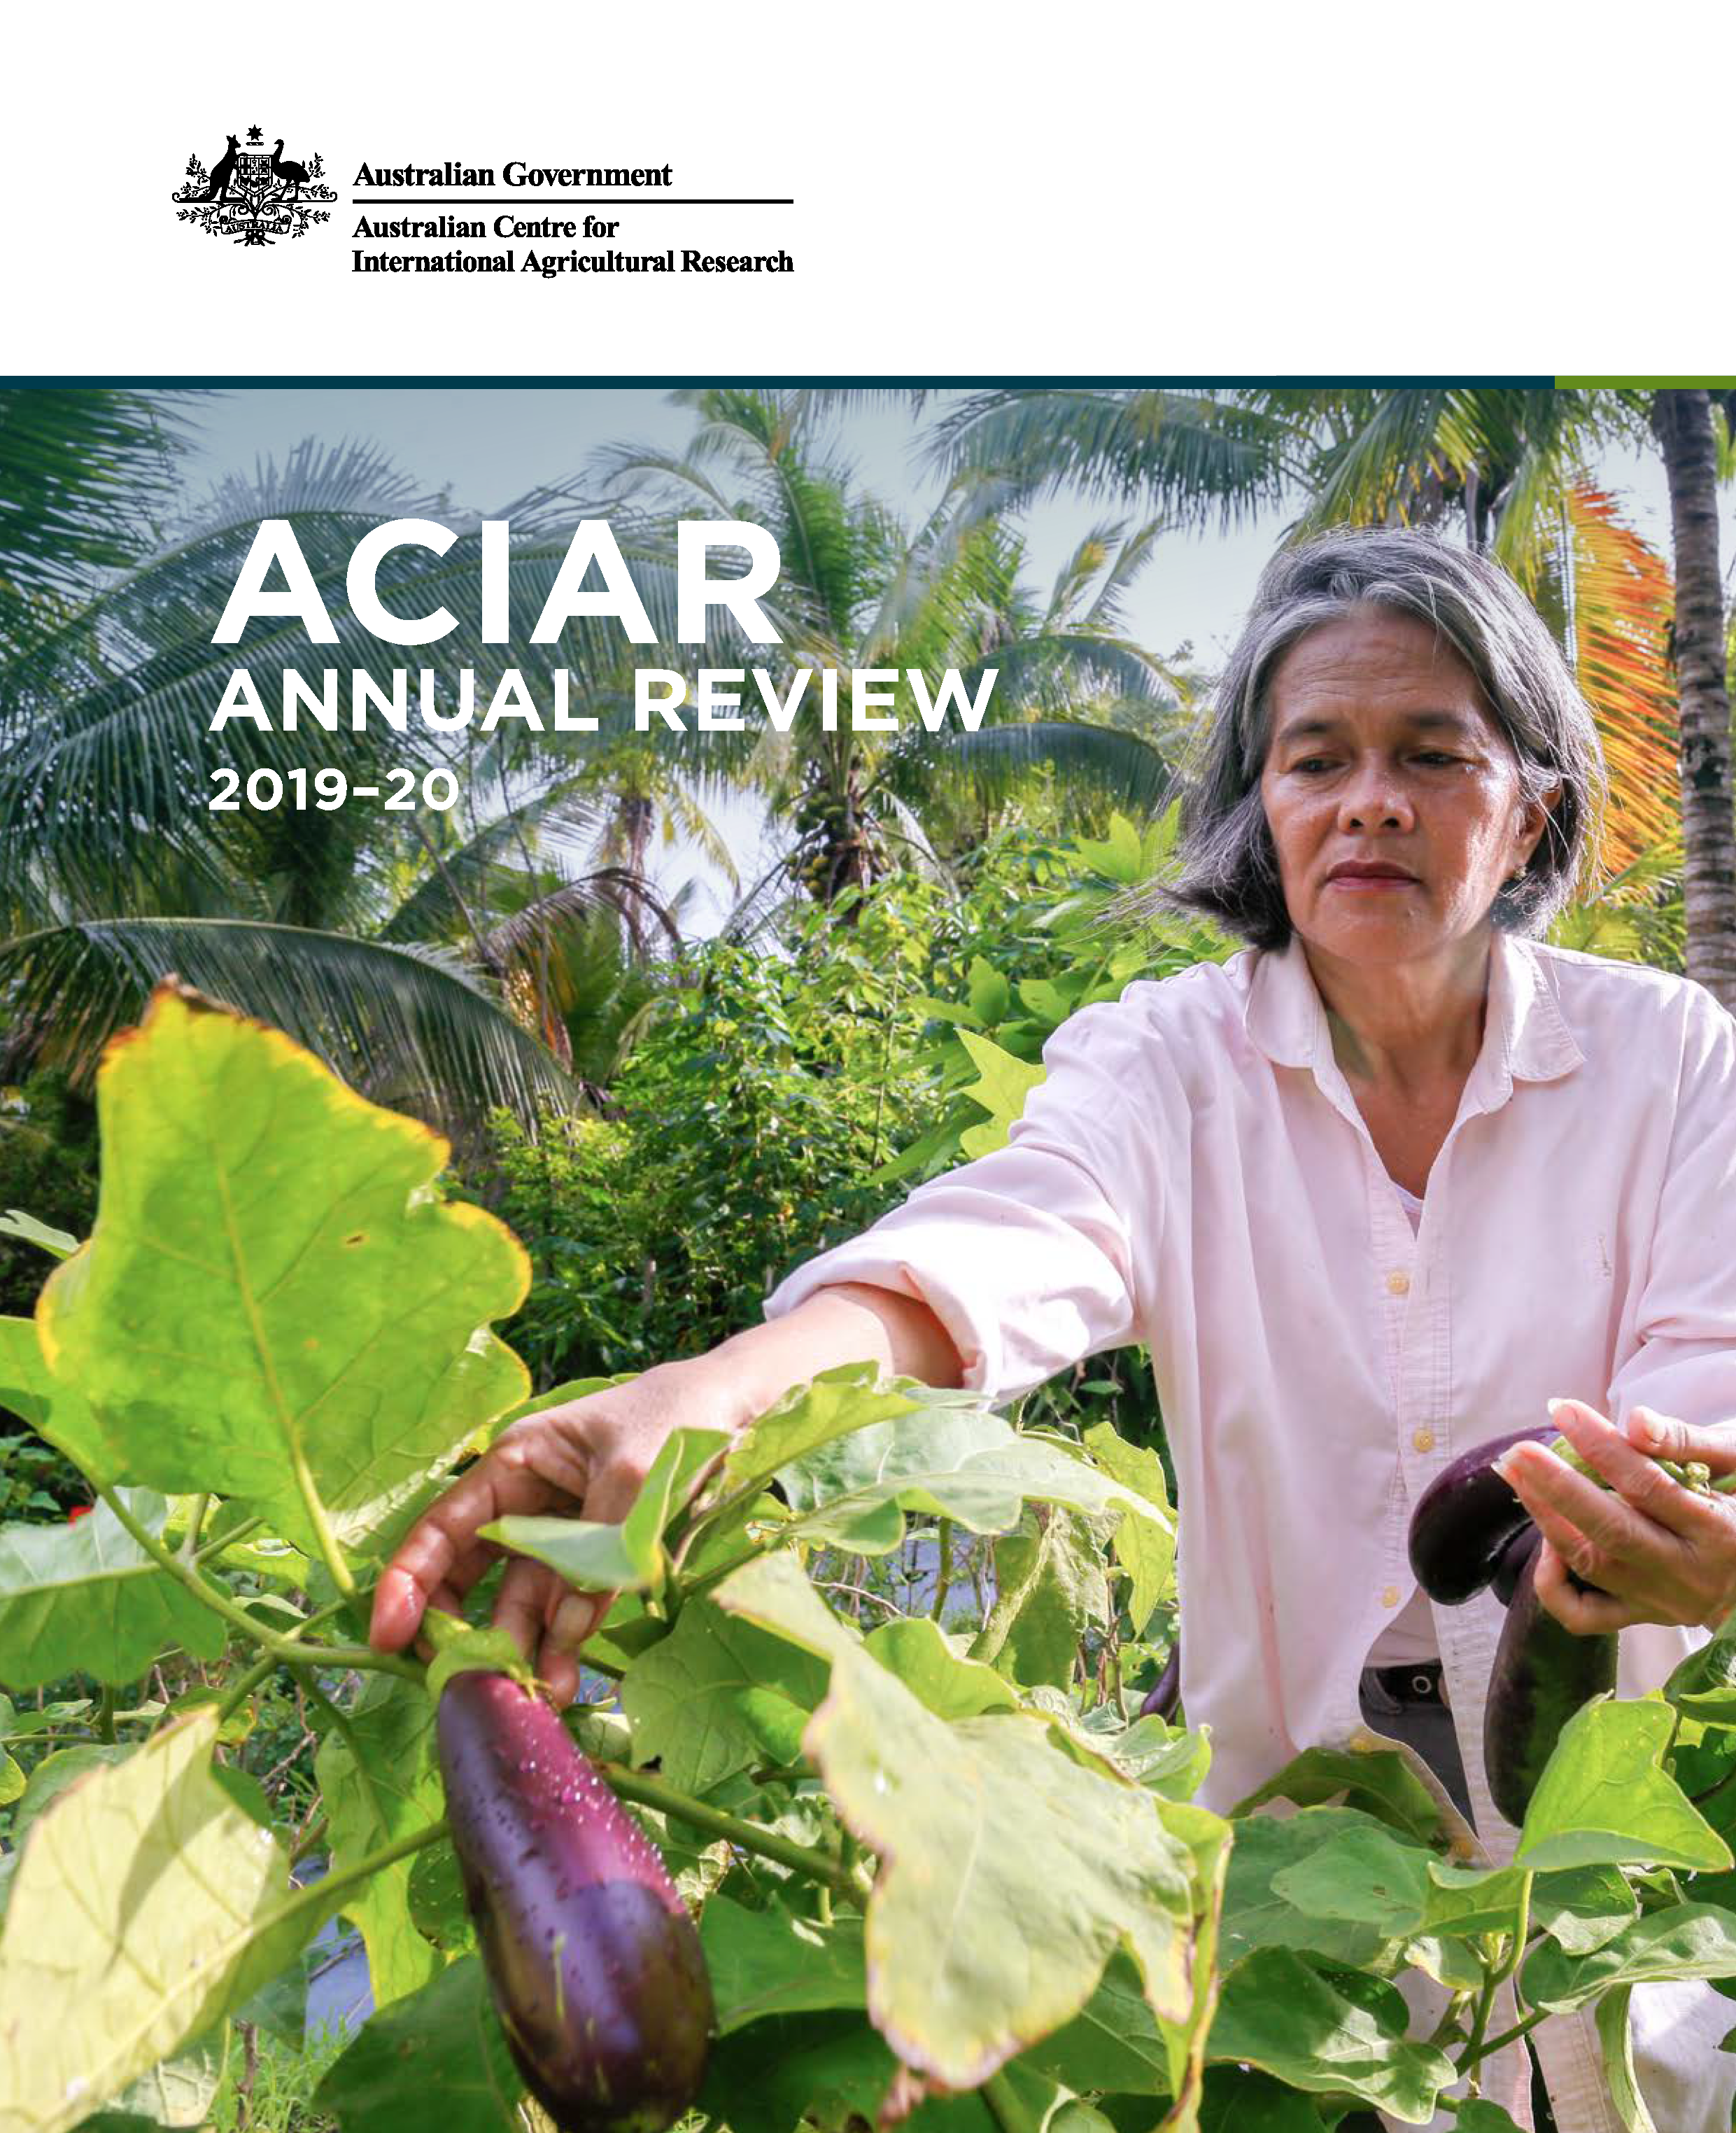 cover of the book showing an older woman with Asian features harvesting eggplants